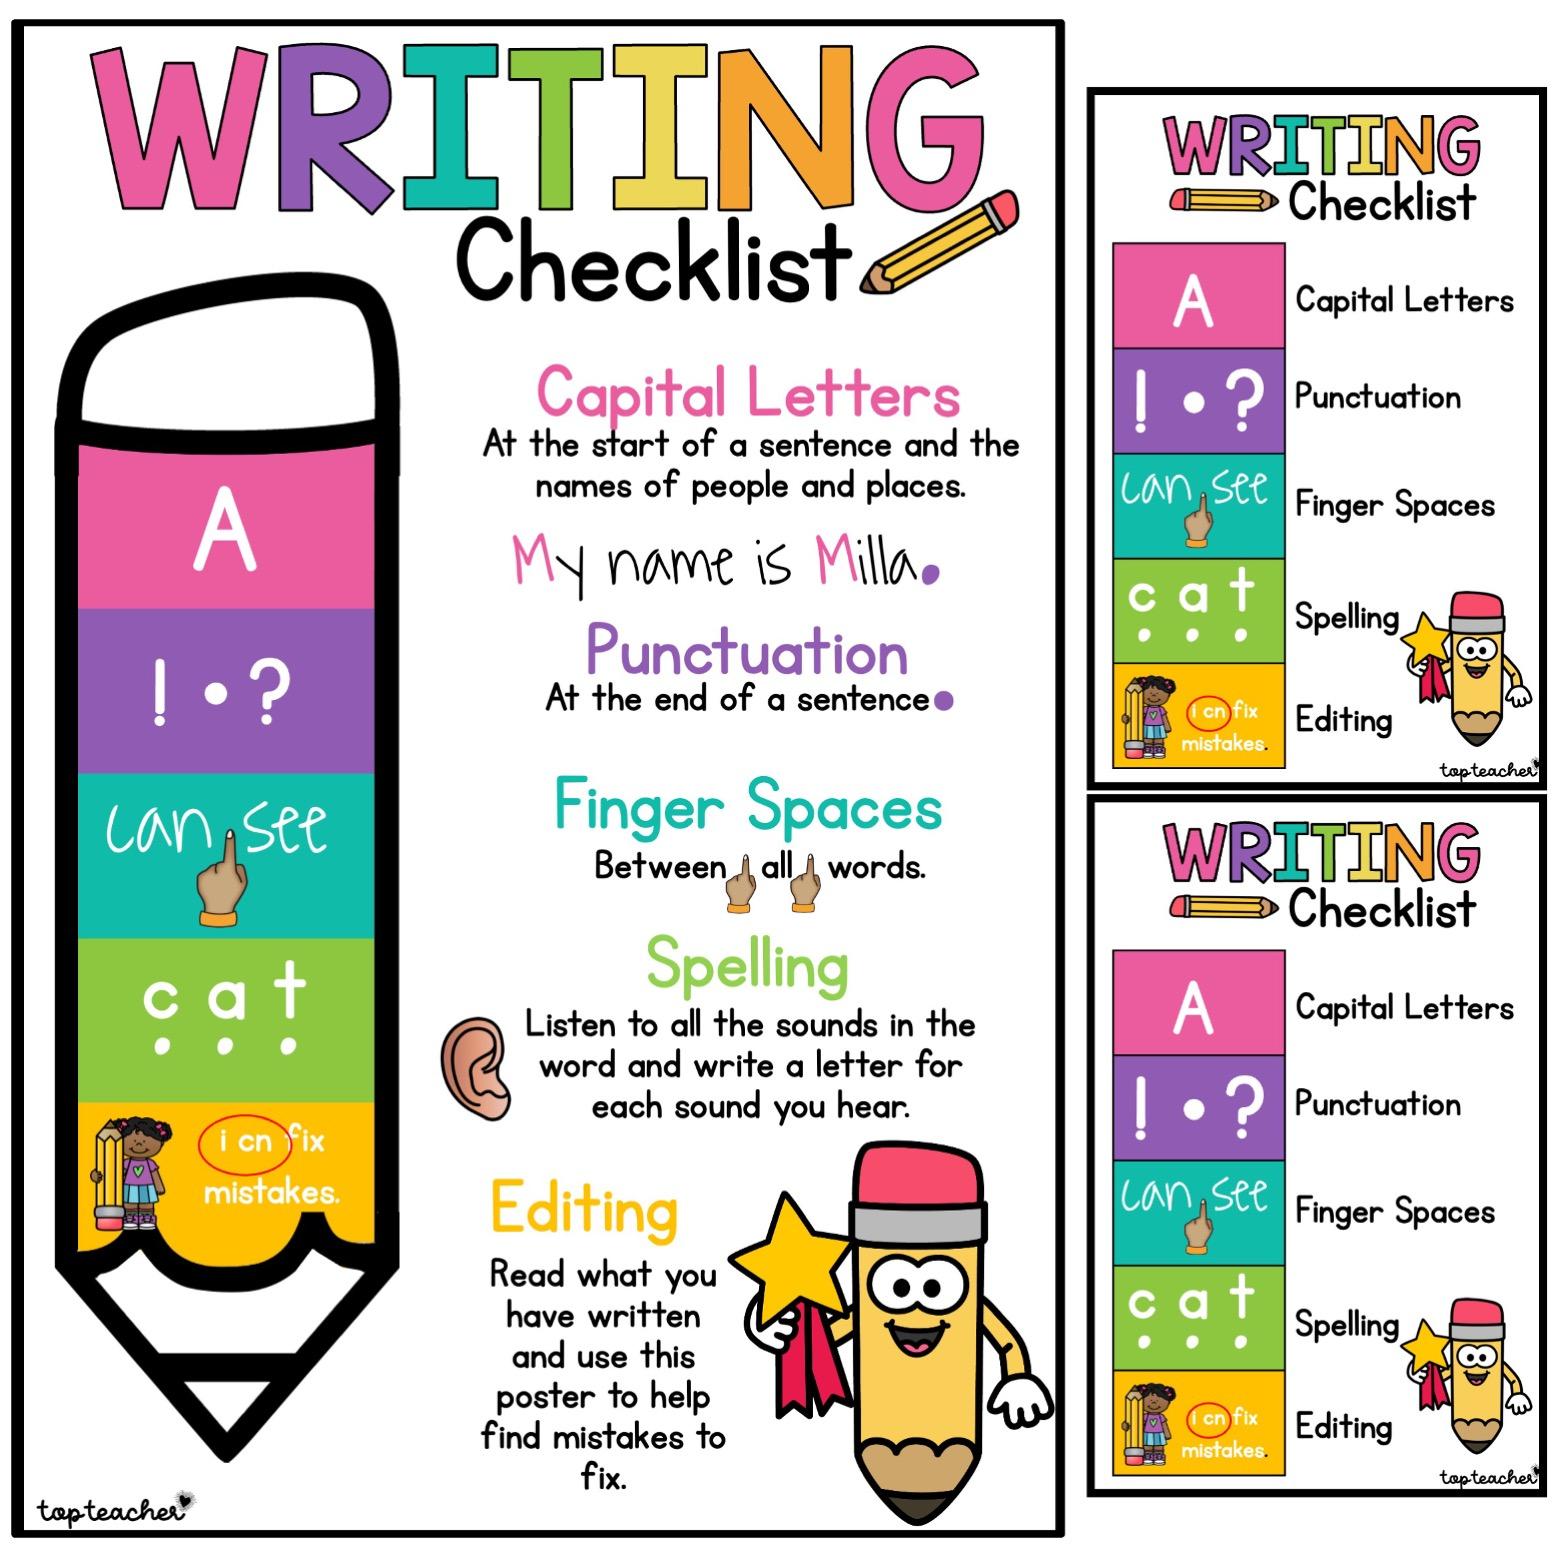 check your writing checklist